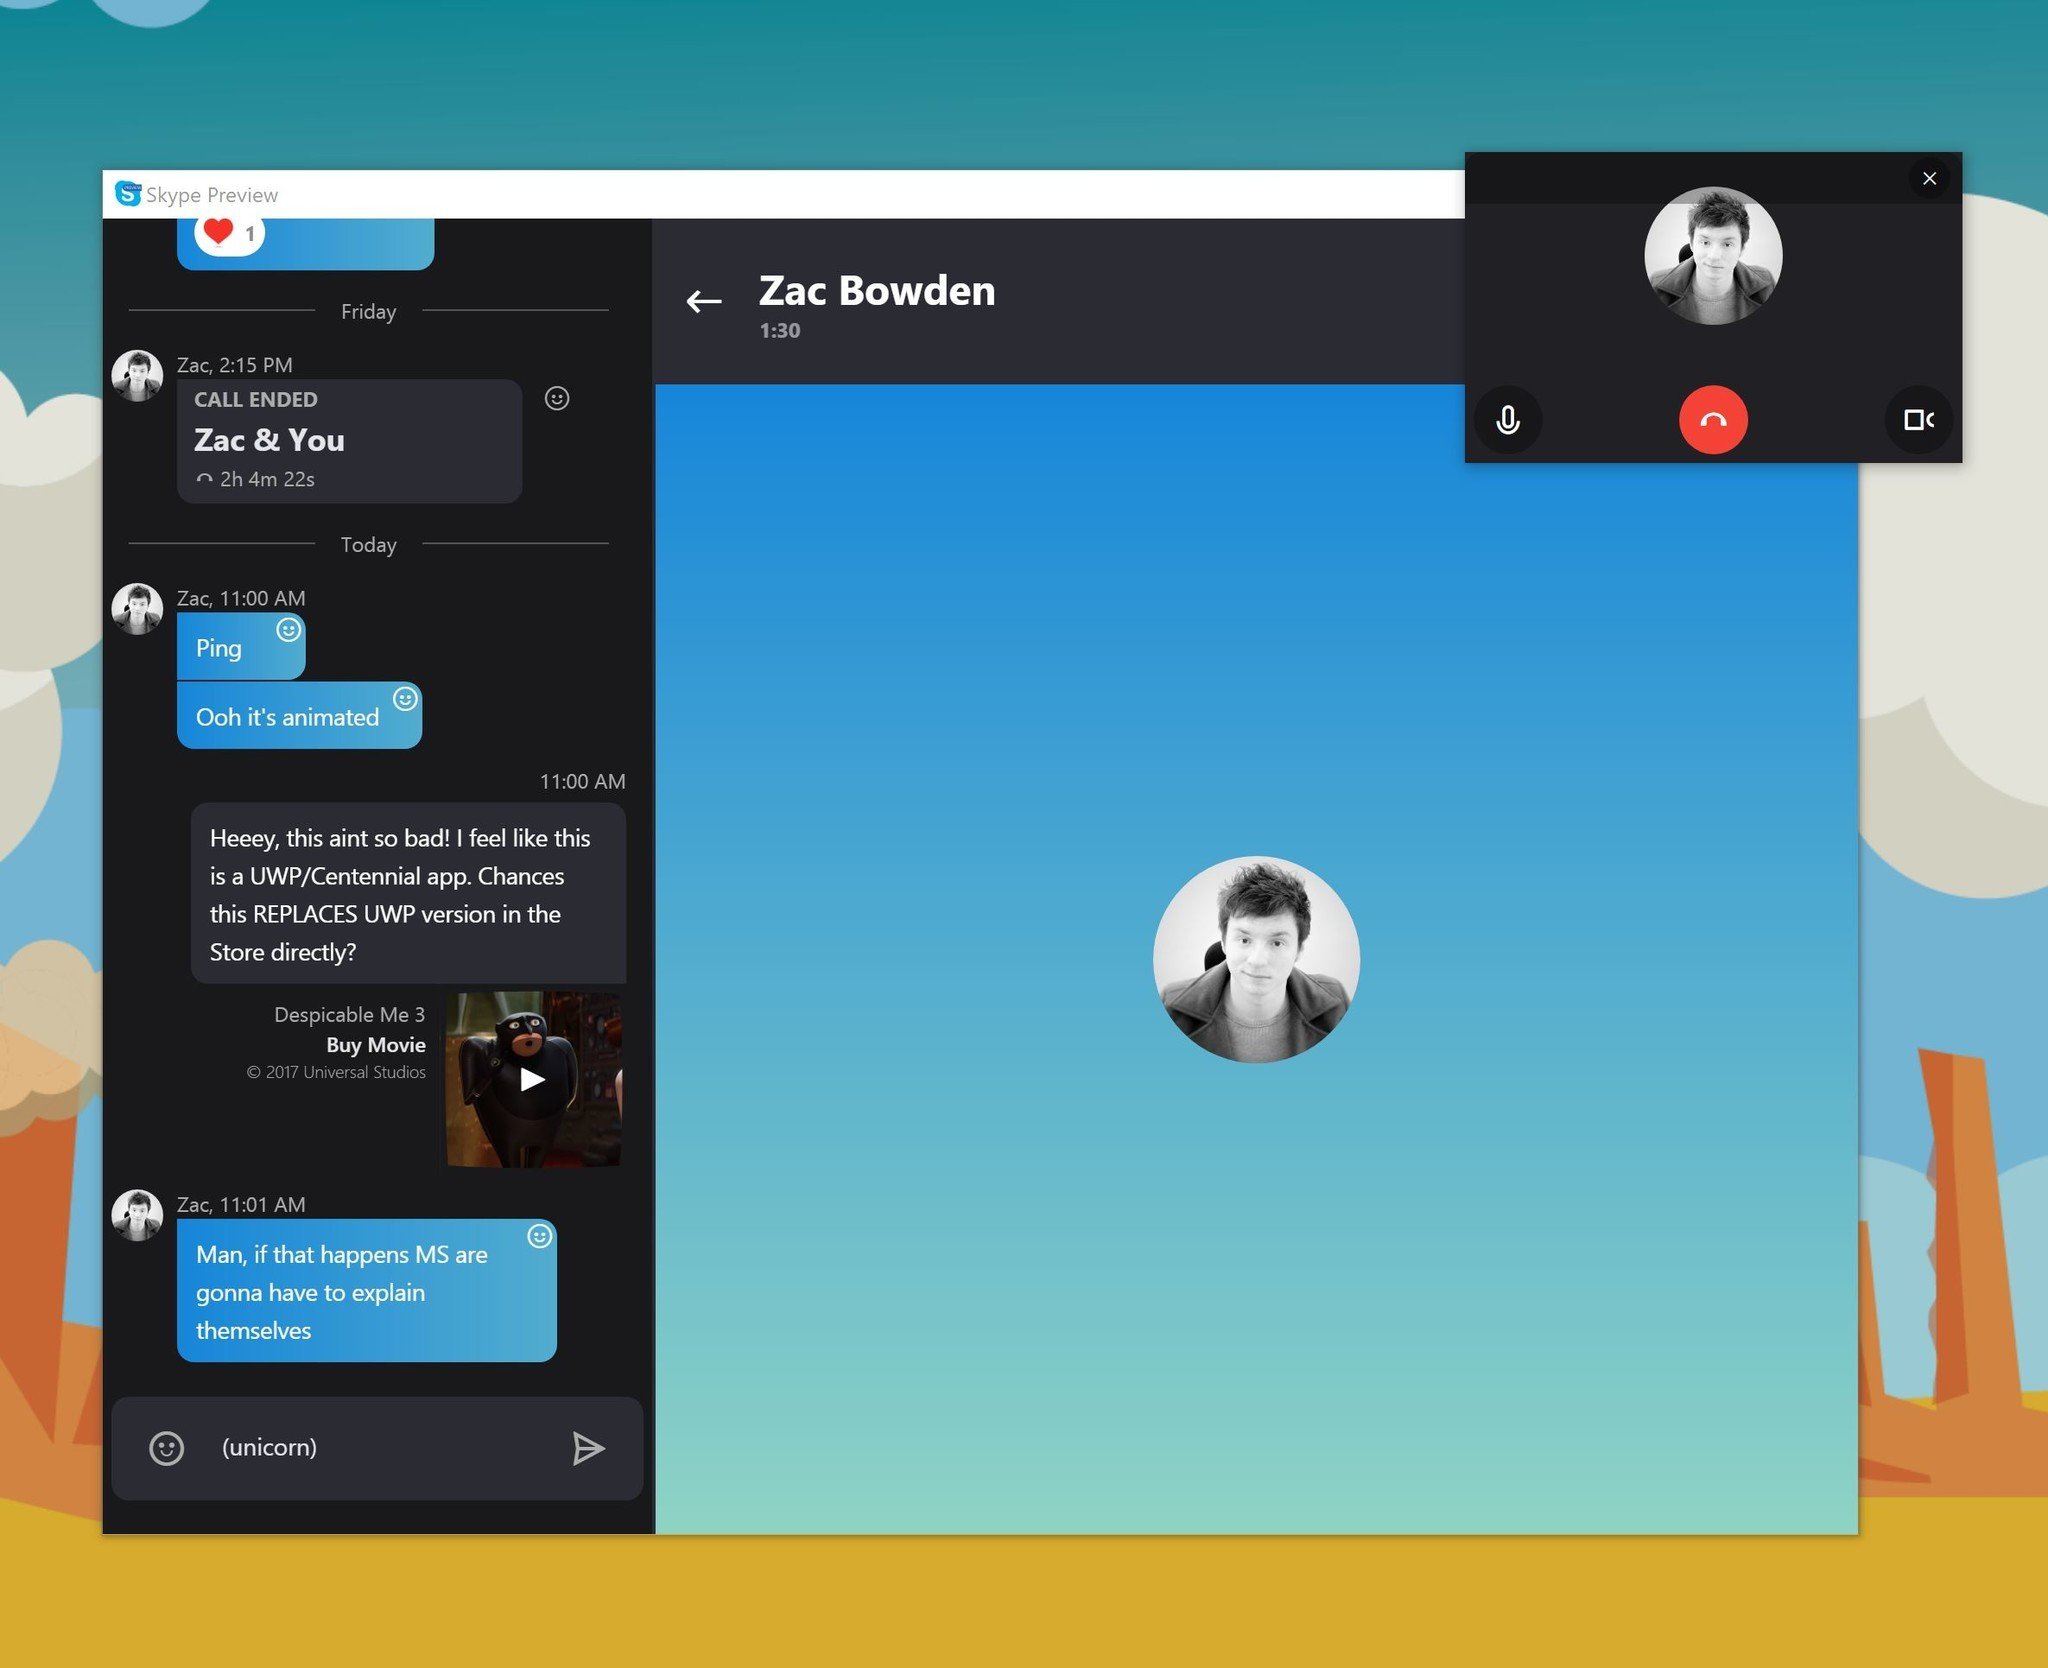 download latest version of skype for windows 10